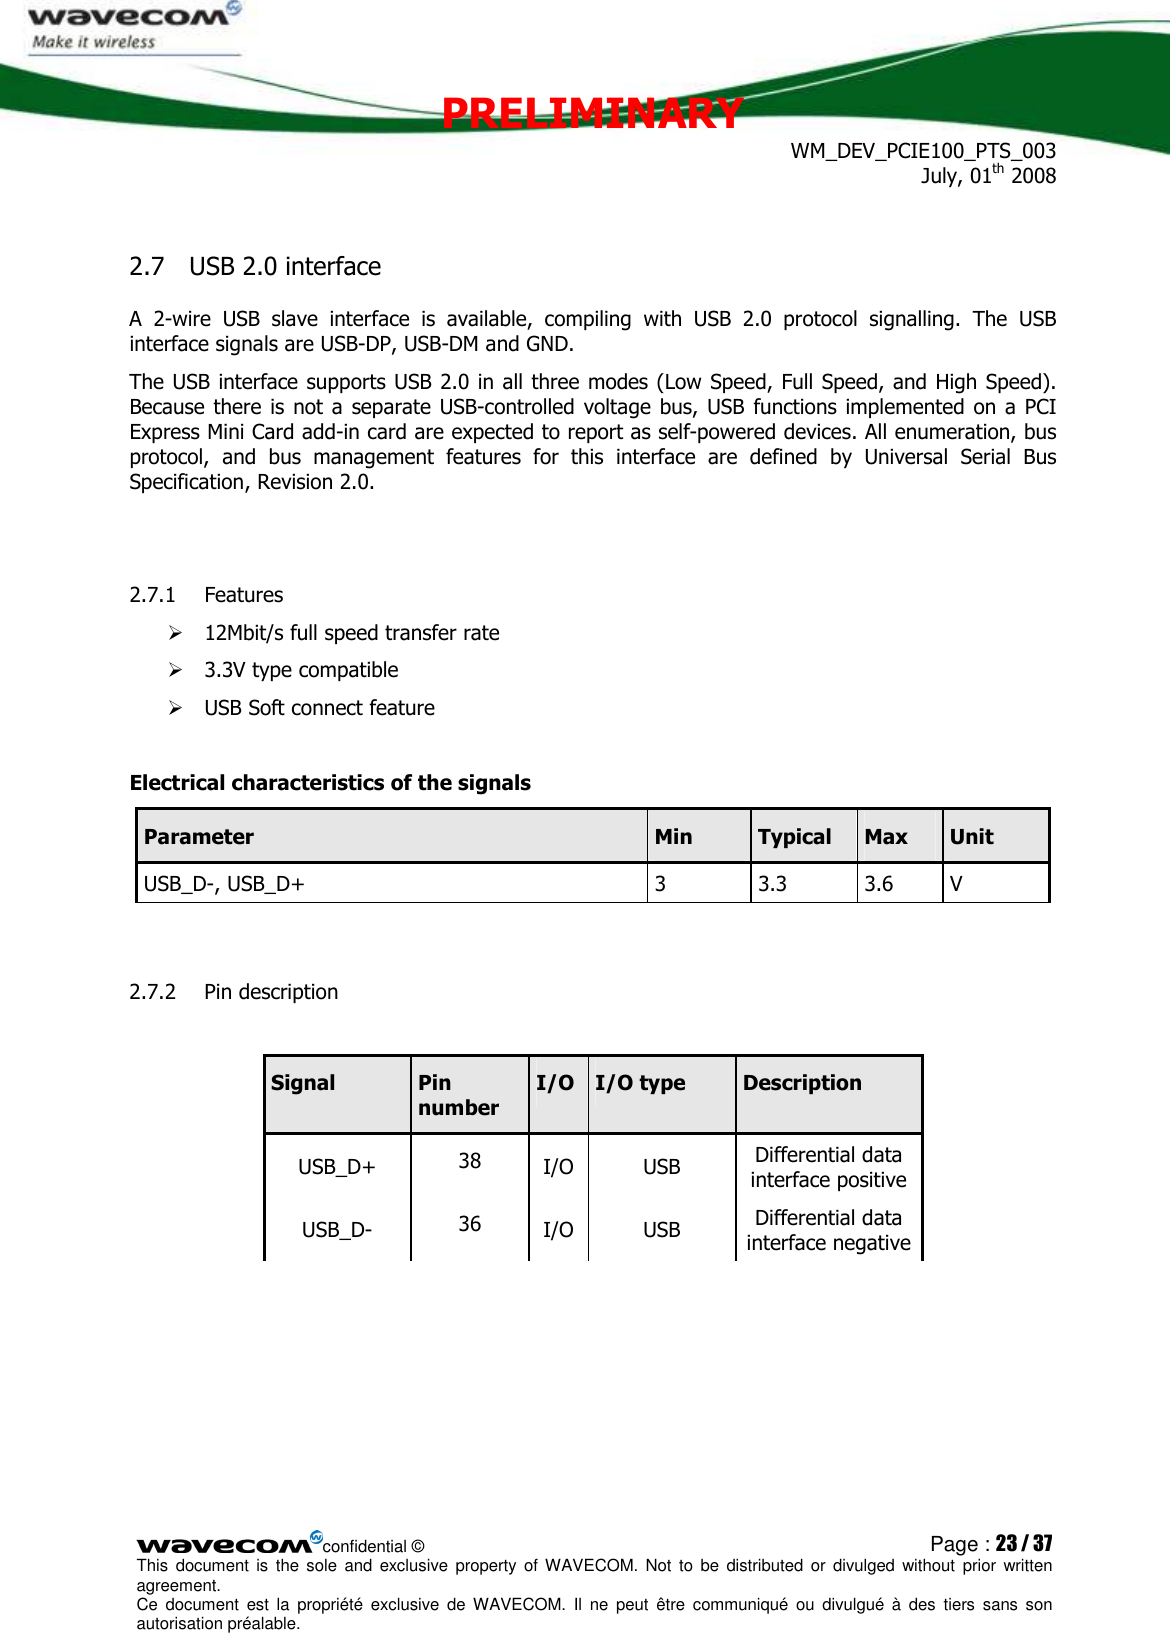 PRELIMINARY WM_DEV_PCIE100_PTS_003 July, 01th 2008  confidential © Page : 23 / 37 This  document  is  the  sole  and  exclusive property  of  WAVECOM.  Not  to  be  distributed  or  divulged  without  prior written agreement.  Ce  document  est  la  propriété  exclusive  de  WAVECOM.  Il  ne  peut  être  communiqué  ou  divulgué à  des  tiers  sans  son autorisation préalable.  2.7 USB 2.0 interface A  2-wire  USB  slave  interface  is  available,  compiling  with  USB  2.0  protocol  signalling.  The  USB interface signals are USB-DP, USB-DM and GND. The USB interface supports USB 2.0 in all three modes (Low Speed, Full Speed, and High Speed). Because there is  not a separate USB-controlled  voltage  bus,  USB functions implemented  on a  PCI Express Mini Card add-in card are expected to report as self-powered devices. All enumeration, bus protocol,  and  bus  management  features  for  this  interface  are  defined  by  Universal  Serial  Bus Specification, Revision 2.0.  2.7.1 Features   12Mbit/s full speed transfer rate  3.3V type compatible  USB Soft connect feature  Electrical characteristics of the signals Parameter  Min  Typical  Max  Unit USB_D-, USB_D+  3  3.3  3.6  V  2.7.2 Pin description   Signal  Pin number I/O I/O type  Description USB_D+  38  I/O  USB  Differential data interface positive USB_D-  36  I/O  USB  Differential data interface negative  